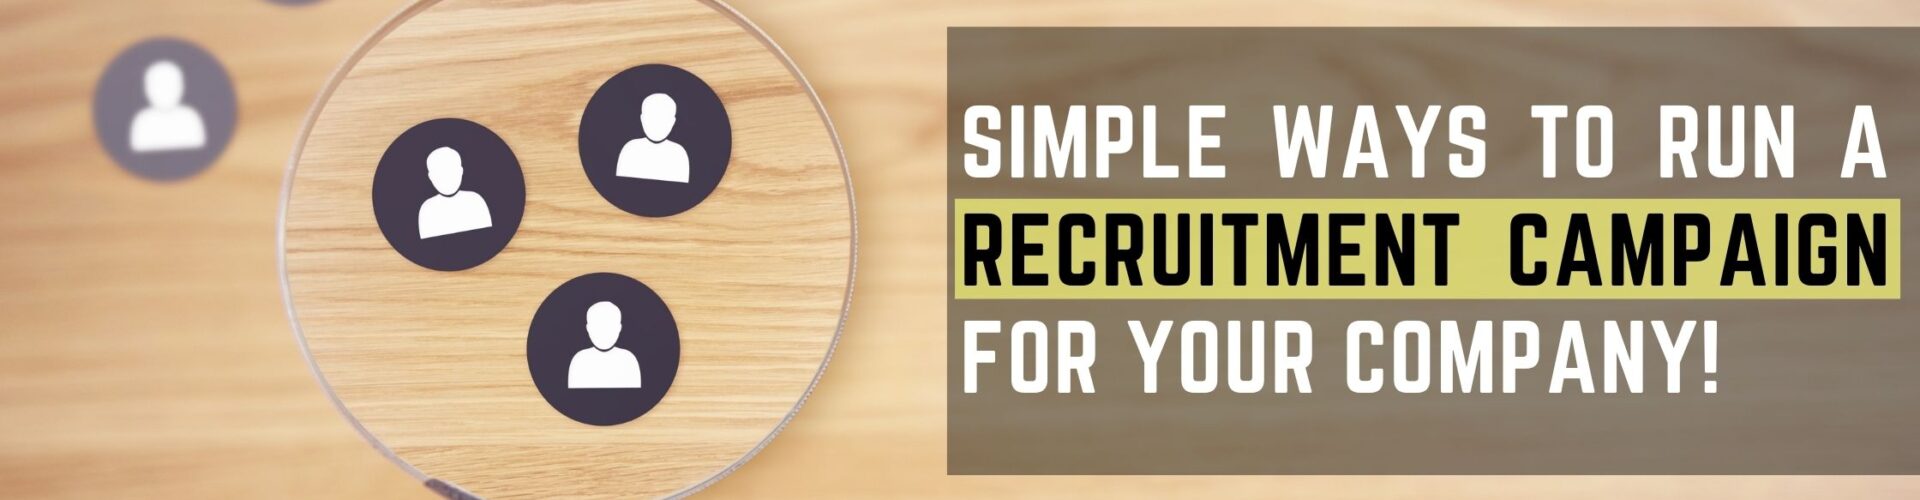 Simple ways to run a recruitment campaign for your company!